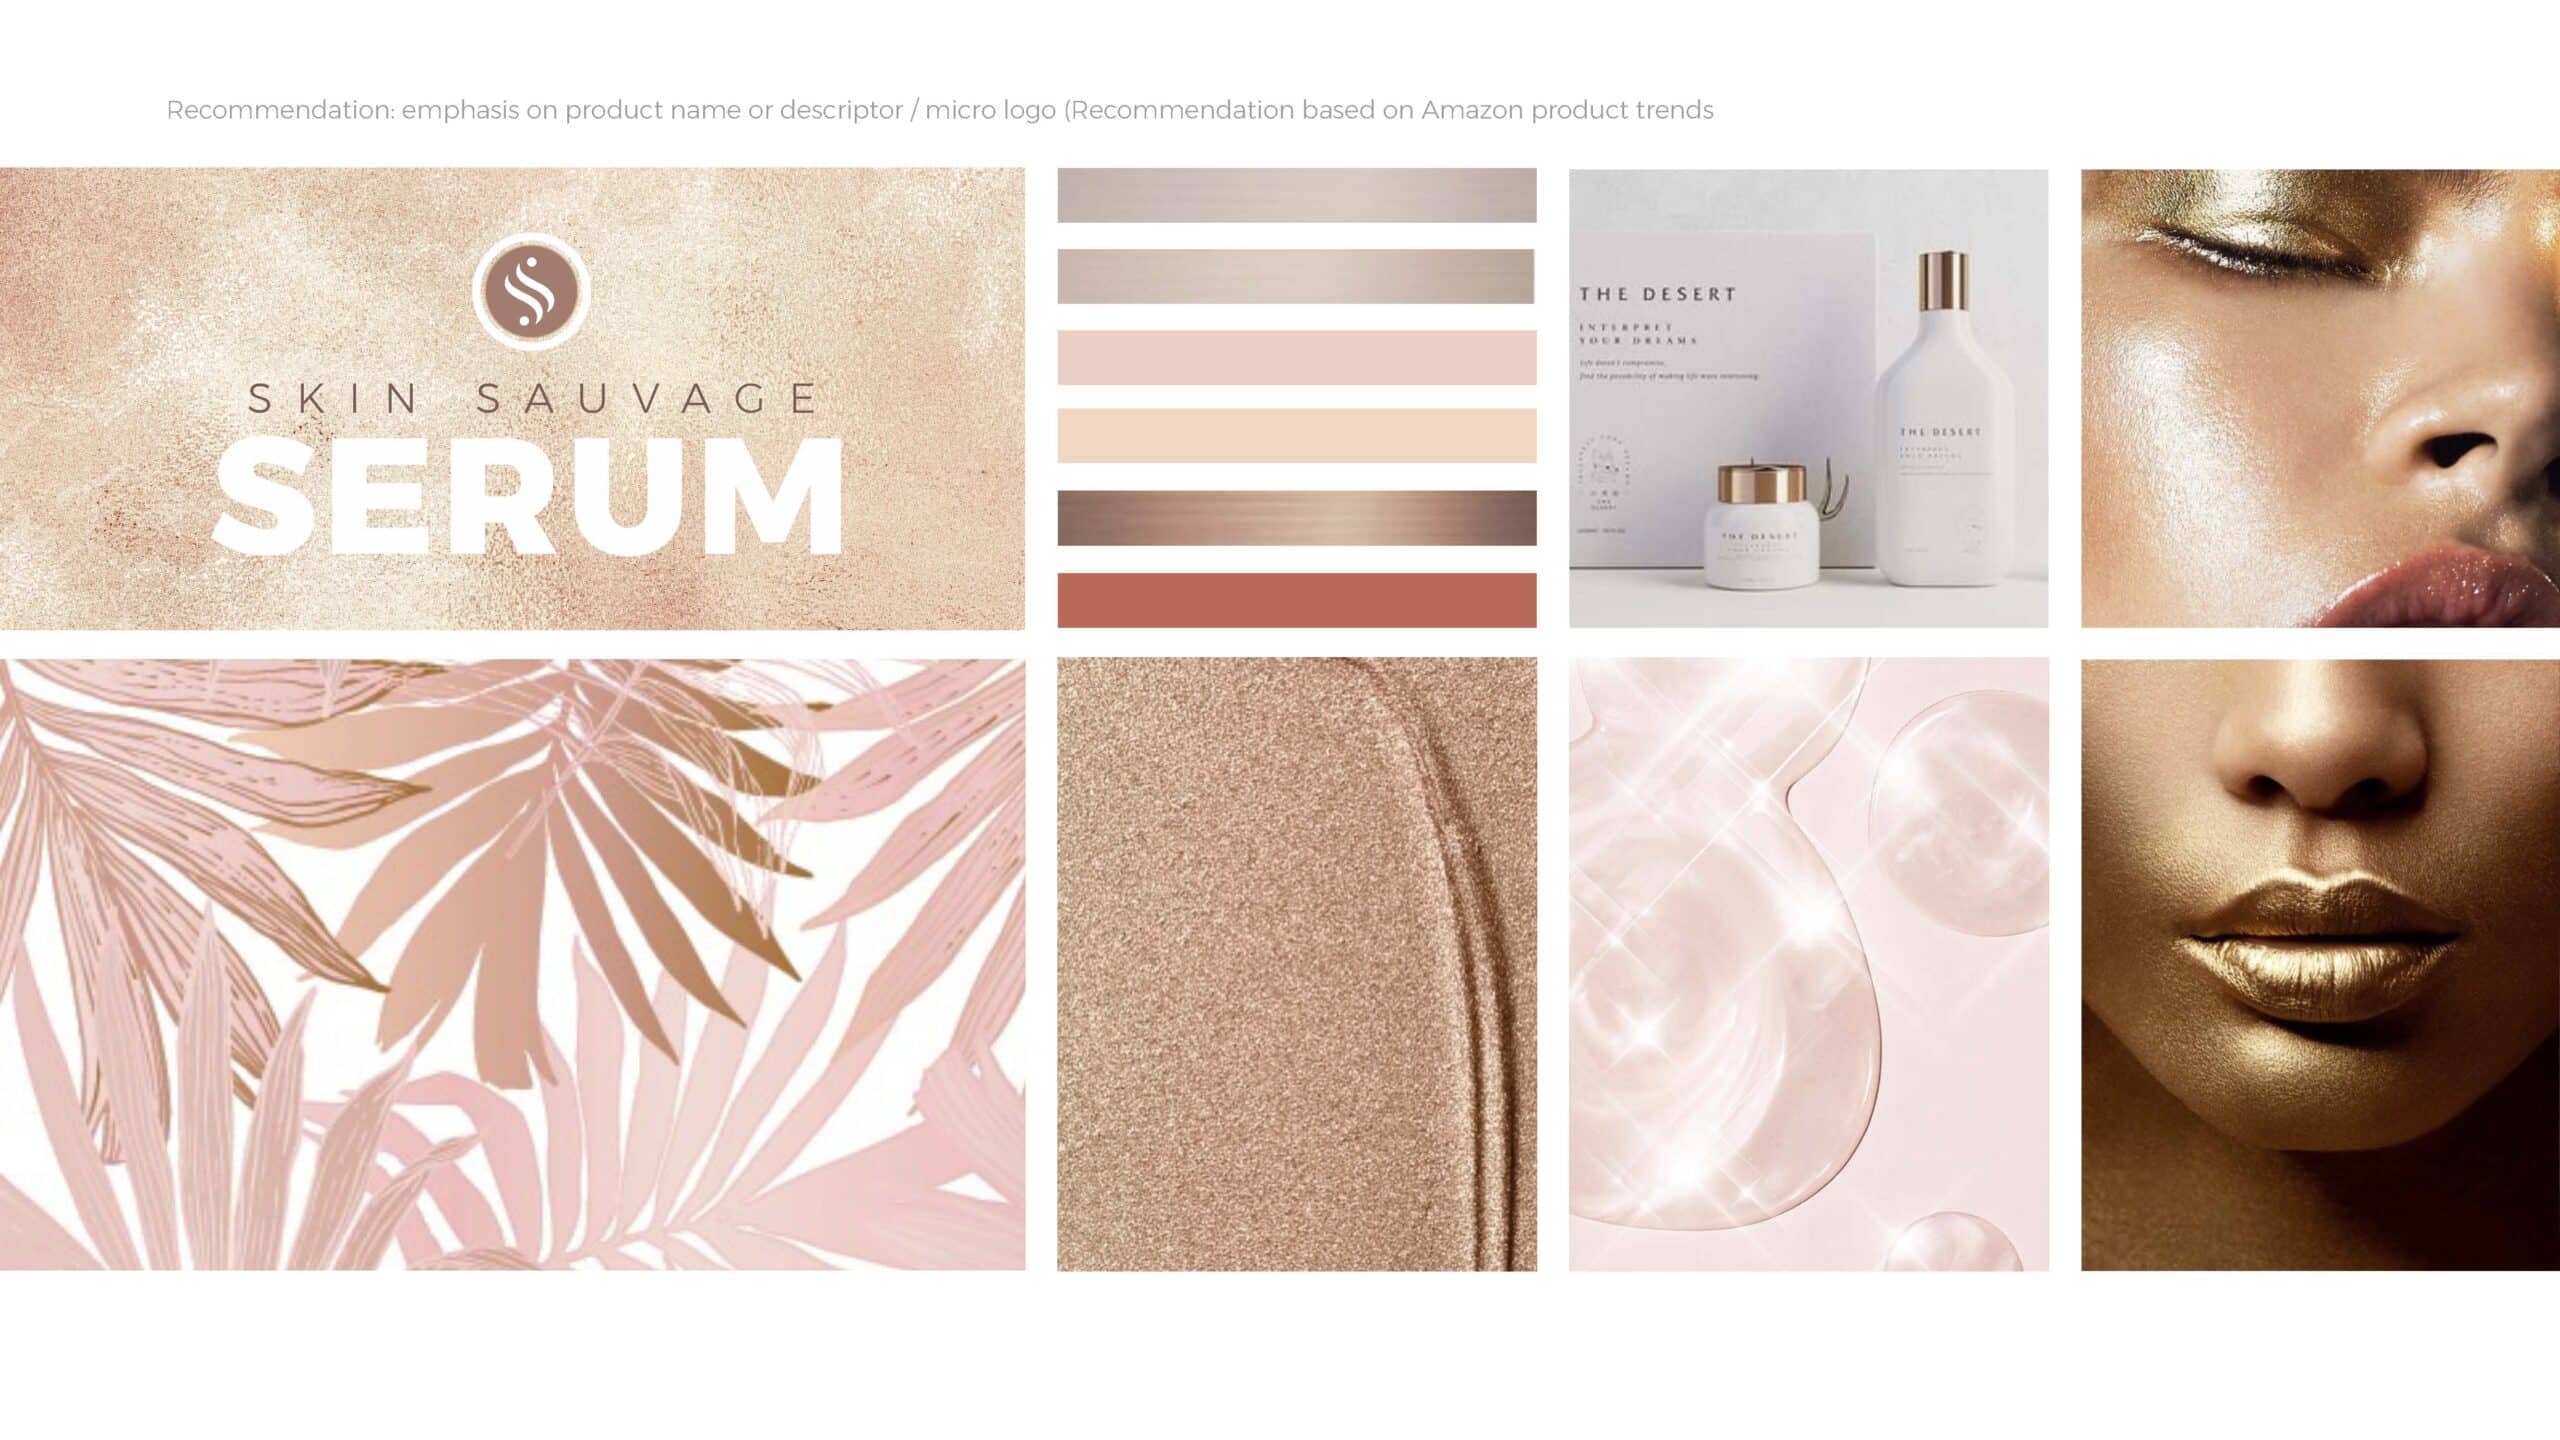 Skin Sauvage skin care packaging moodboard branding concept.